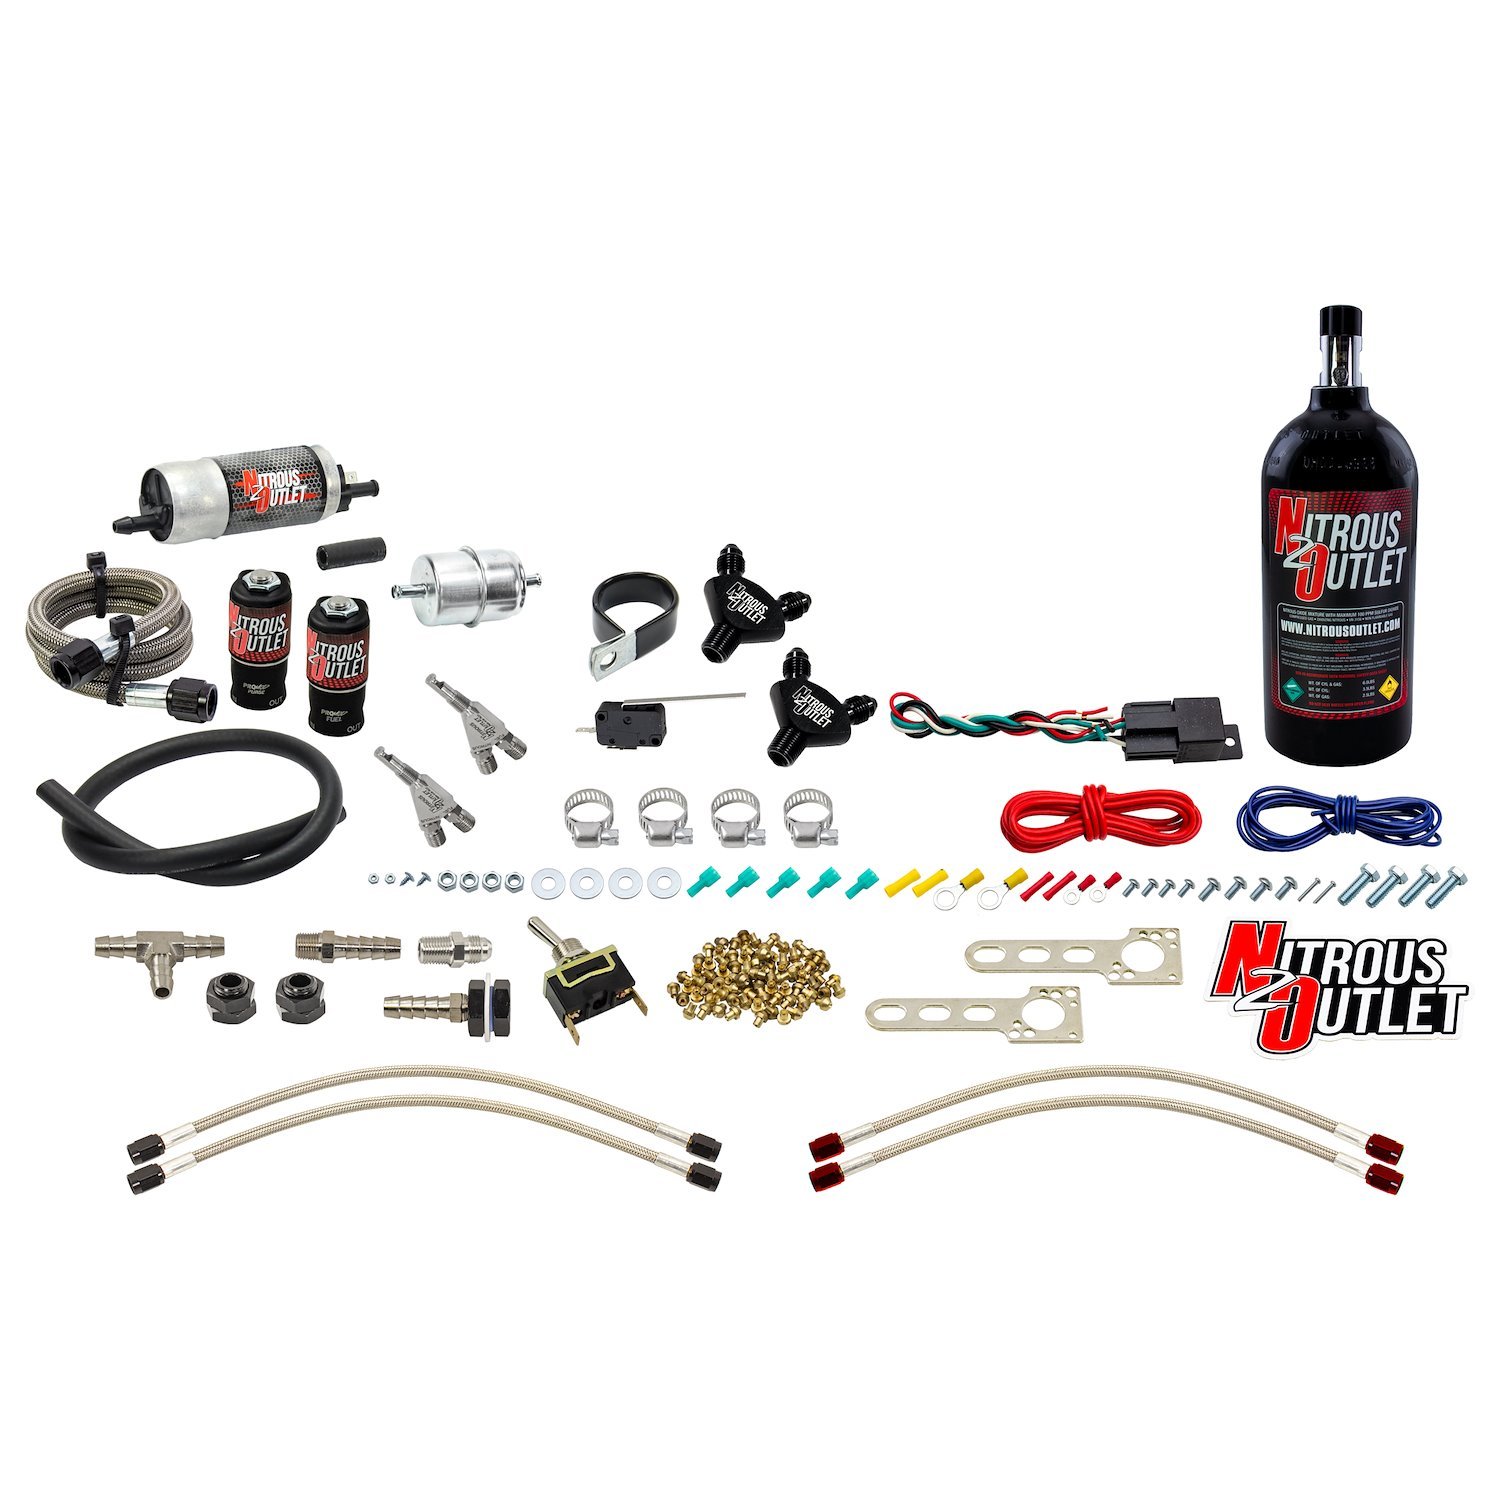 50-10022-2.5 Powersports Twin-Cyl Wet Nozzle System, Stainless 90-Degree Nozzles, Gas, 6 psi, 2030405060 HP, 2.5LB Bottle